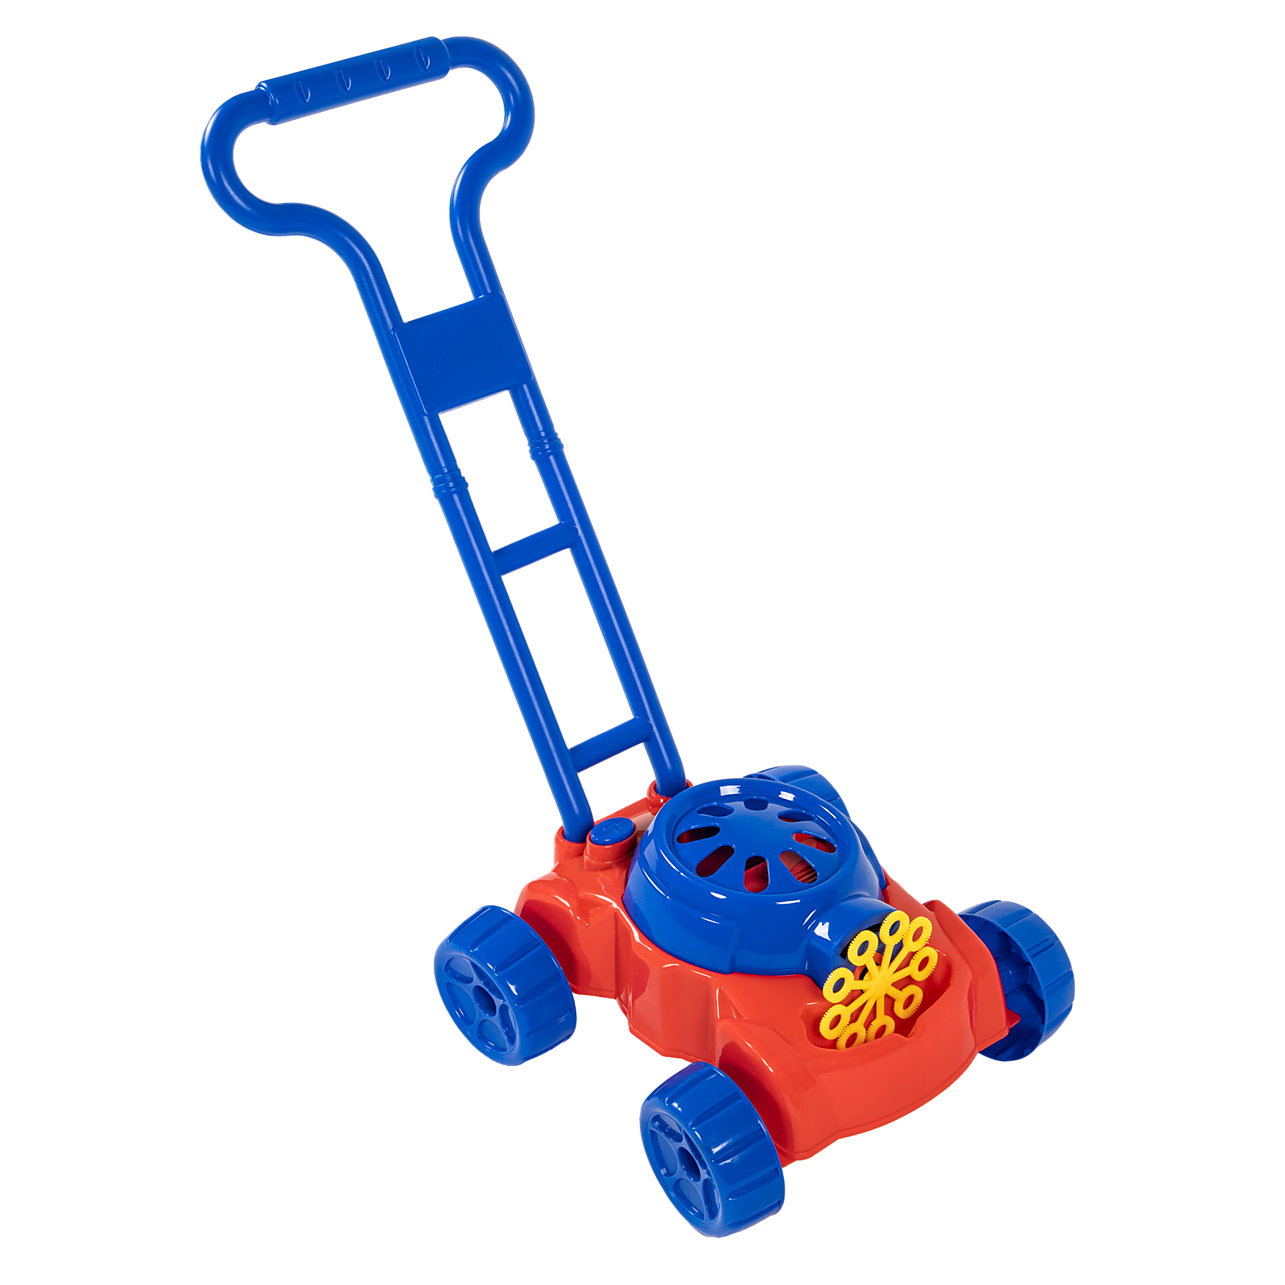 Bubble Mower For Toddlers, Kids Bubble Blower Machine Lawn Games